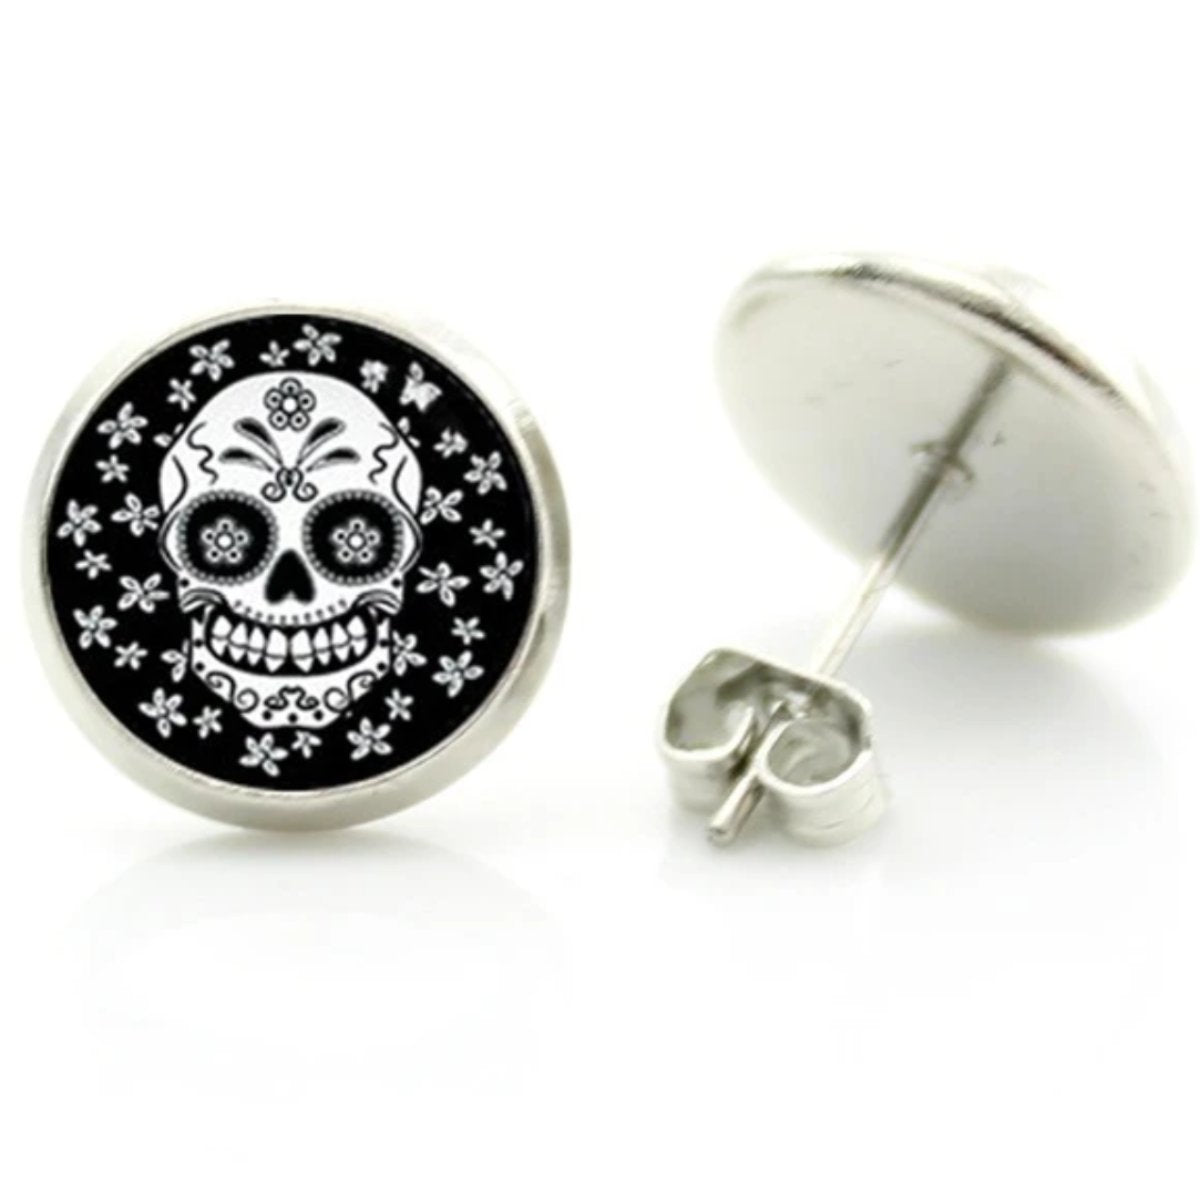 Statement Sugar Skull Stud Earrings for the Day of the Dead.